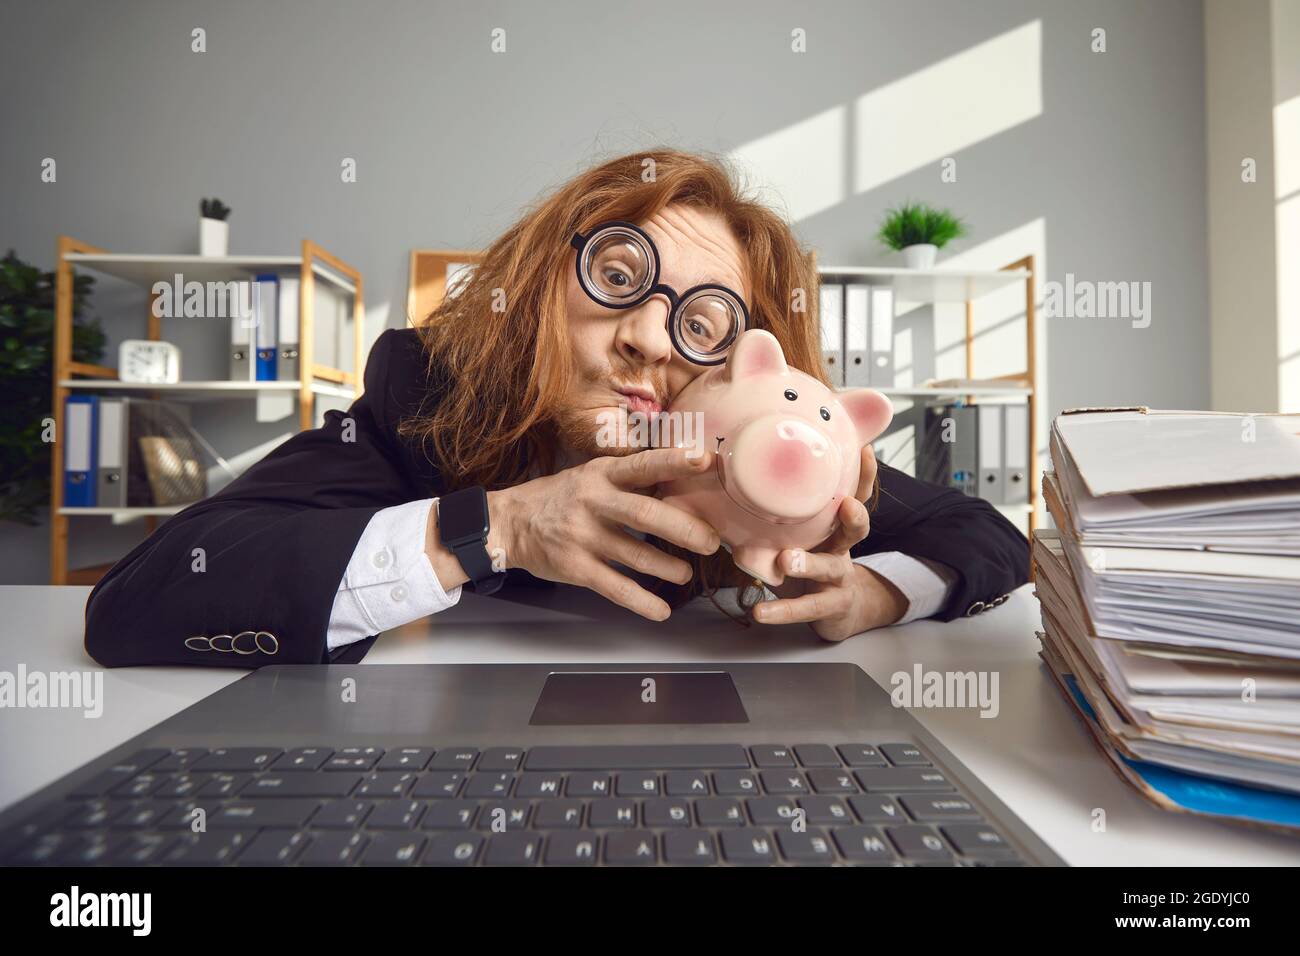 Strange freak guy in big round glasses kisses a piggy bank while sitting at office desk with laptop. Stock Photo